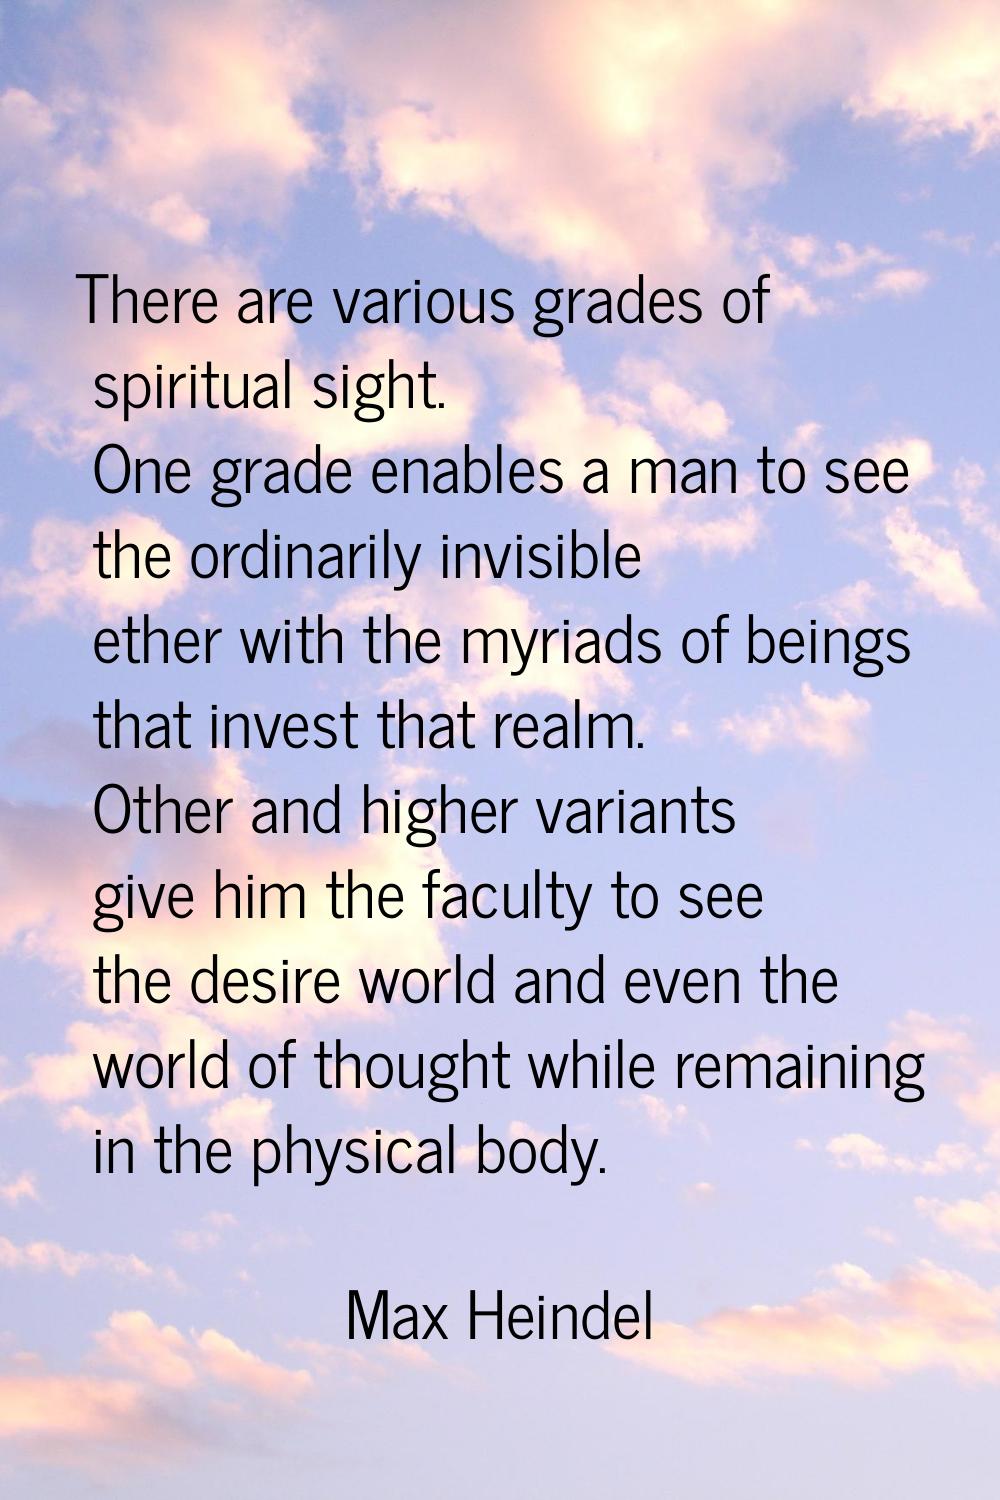 There are various grades of spiritual sight. One grade enables a man to see the ordinarily invisibl